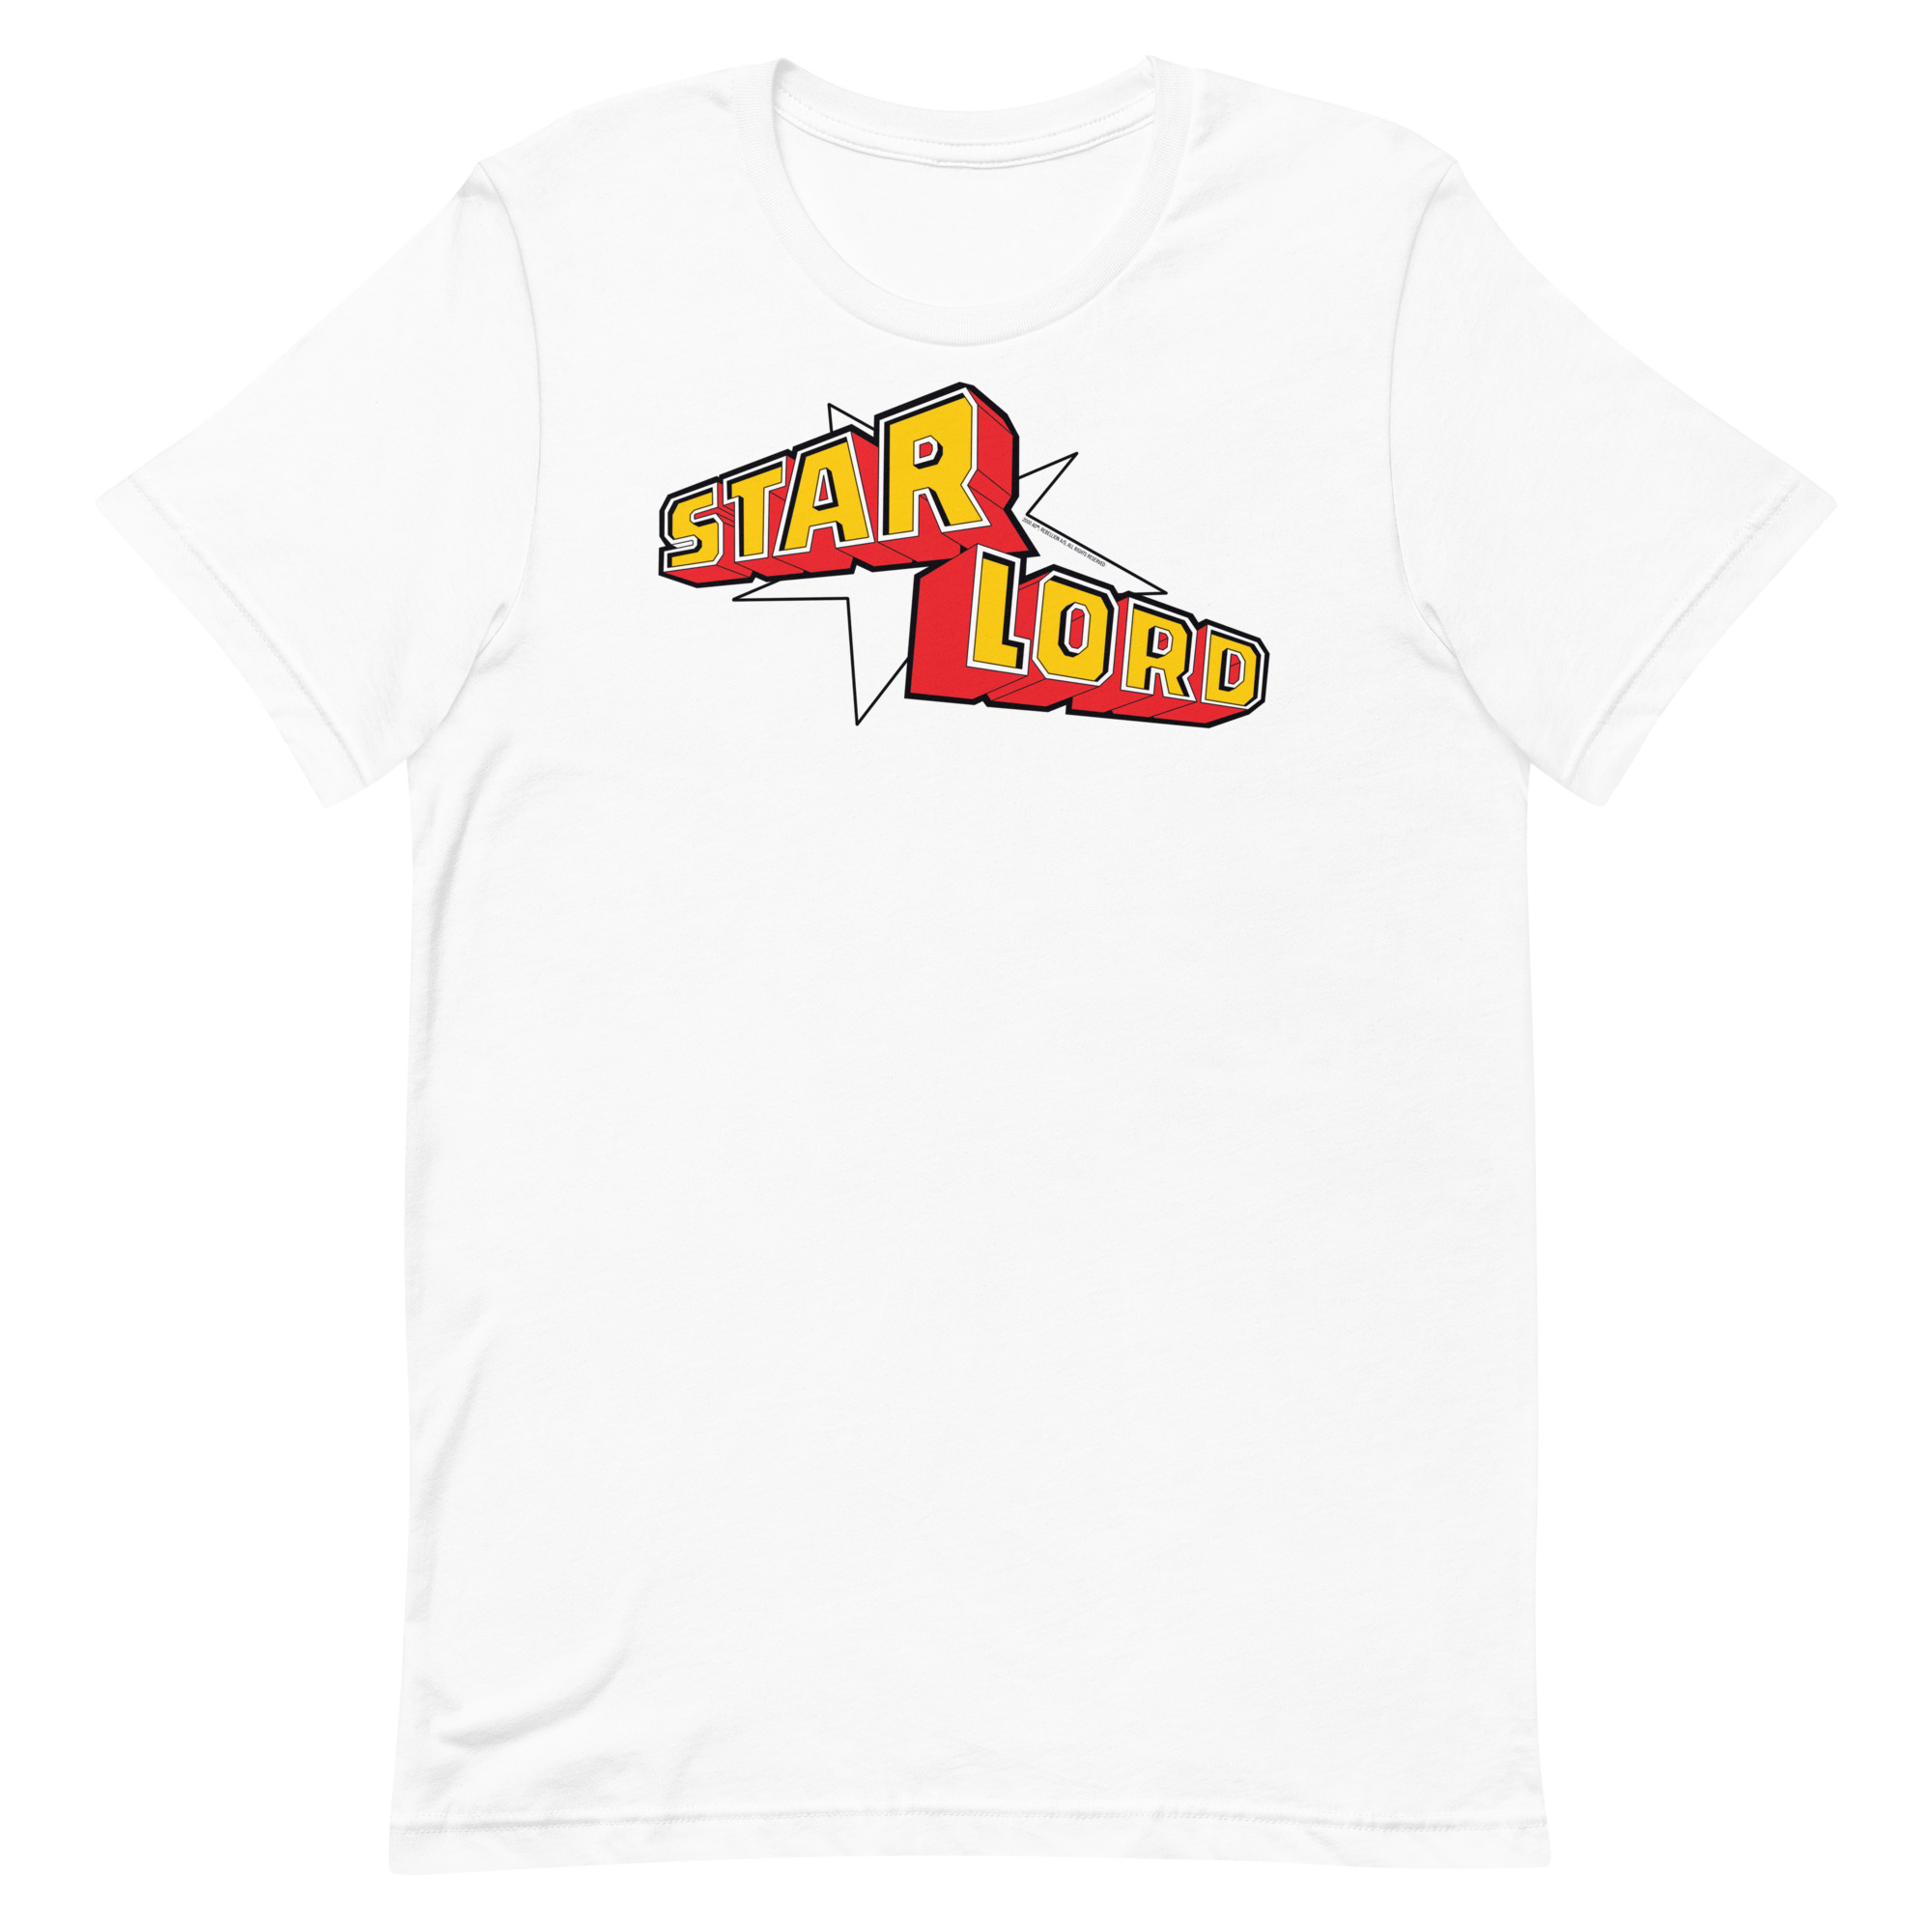 Image of a White coloured Star Lord t-shirt featuring a large Star Lord logo in the middle